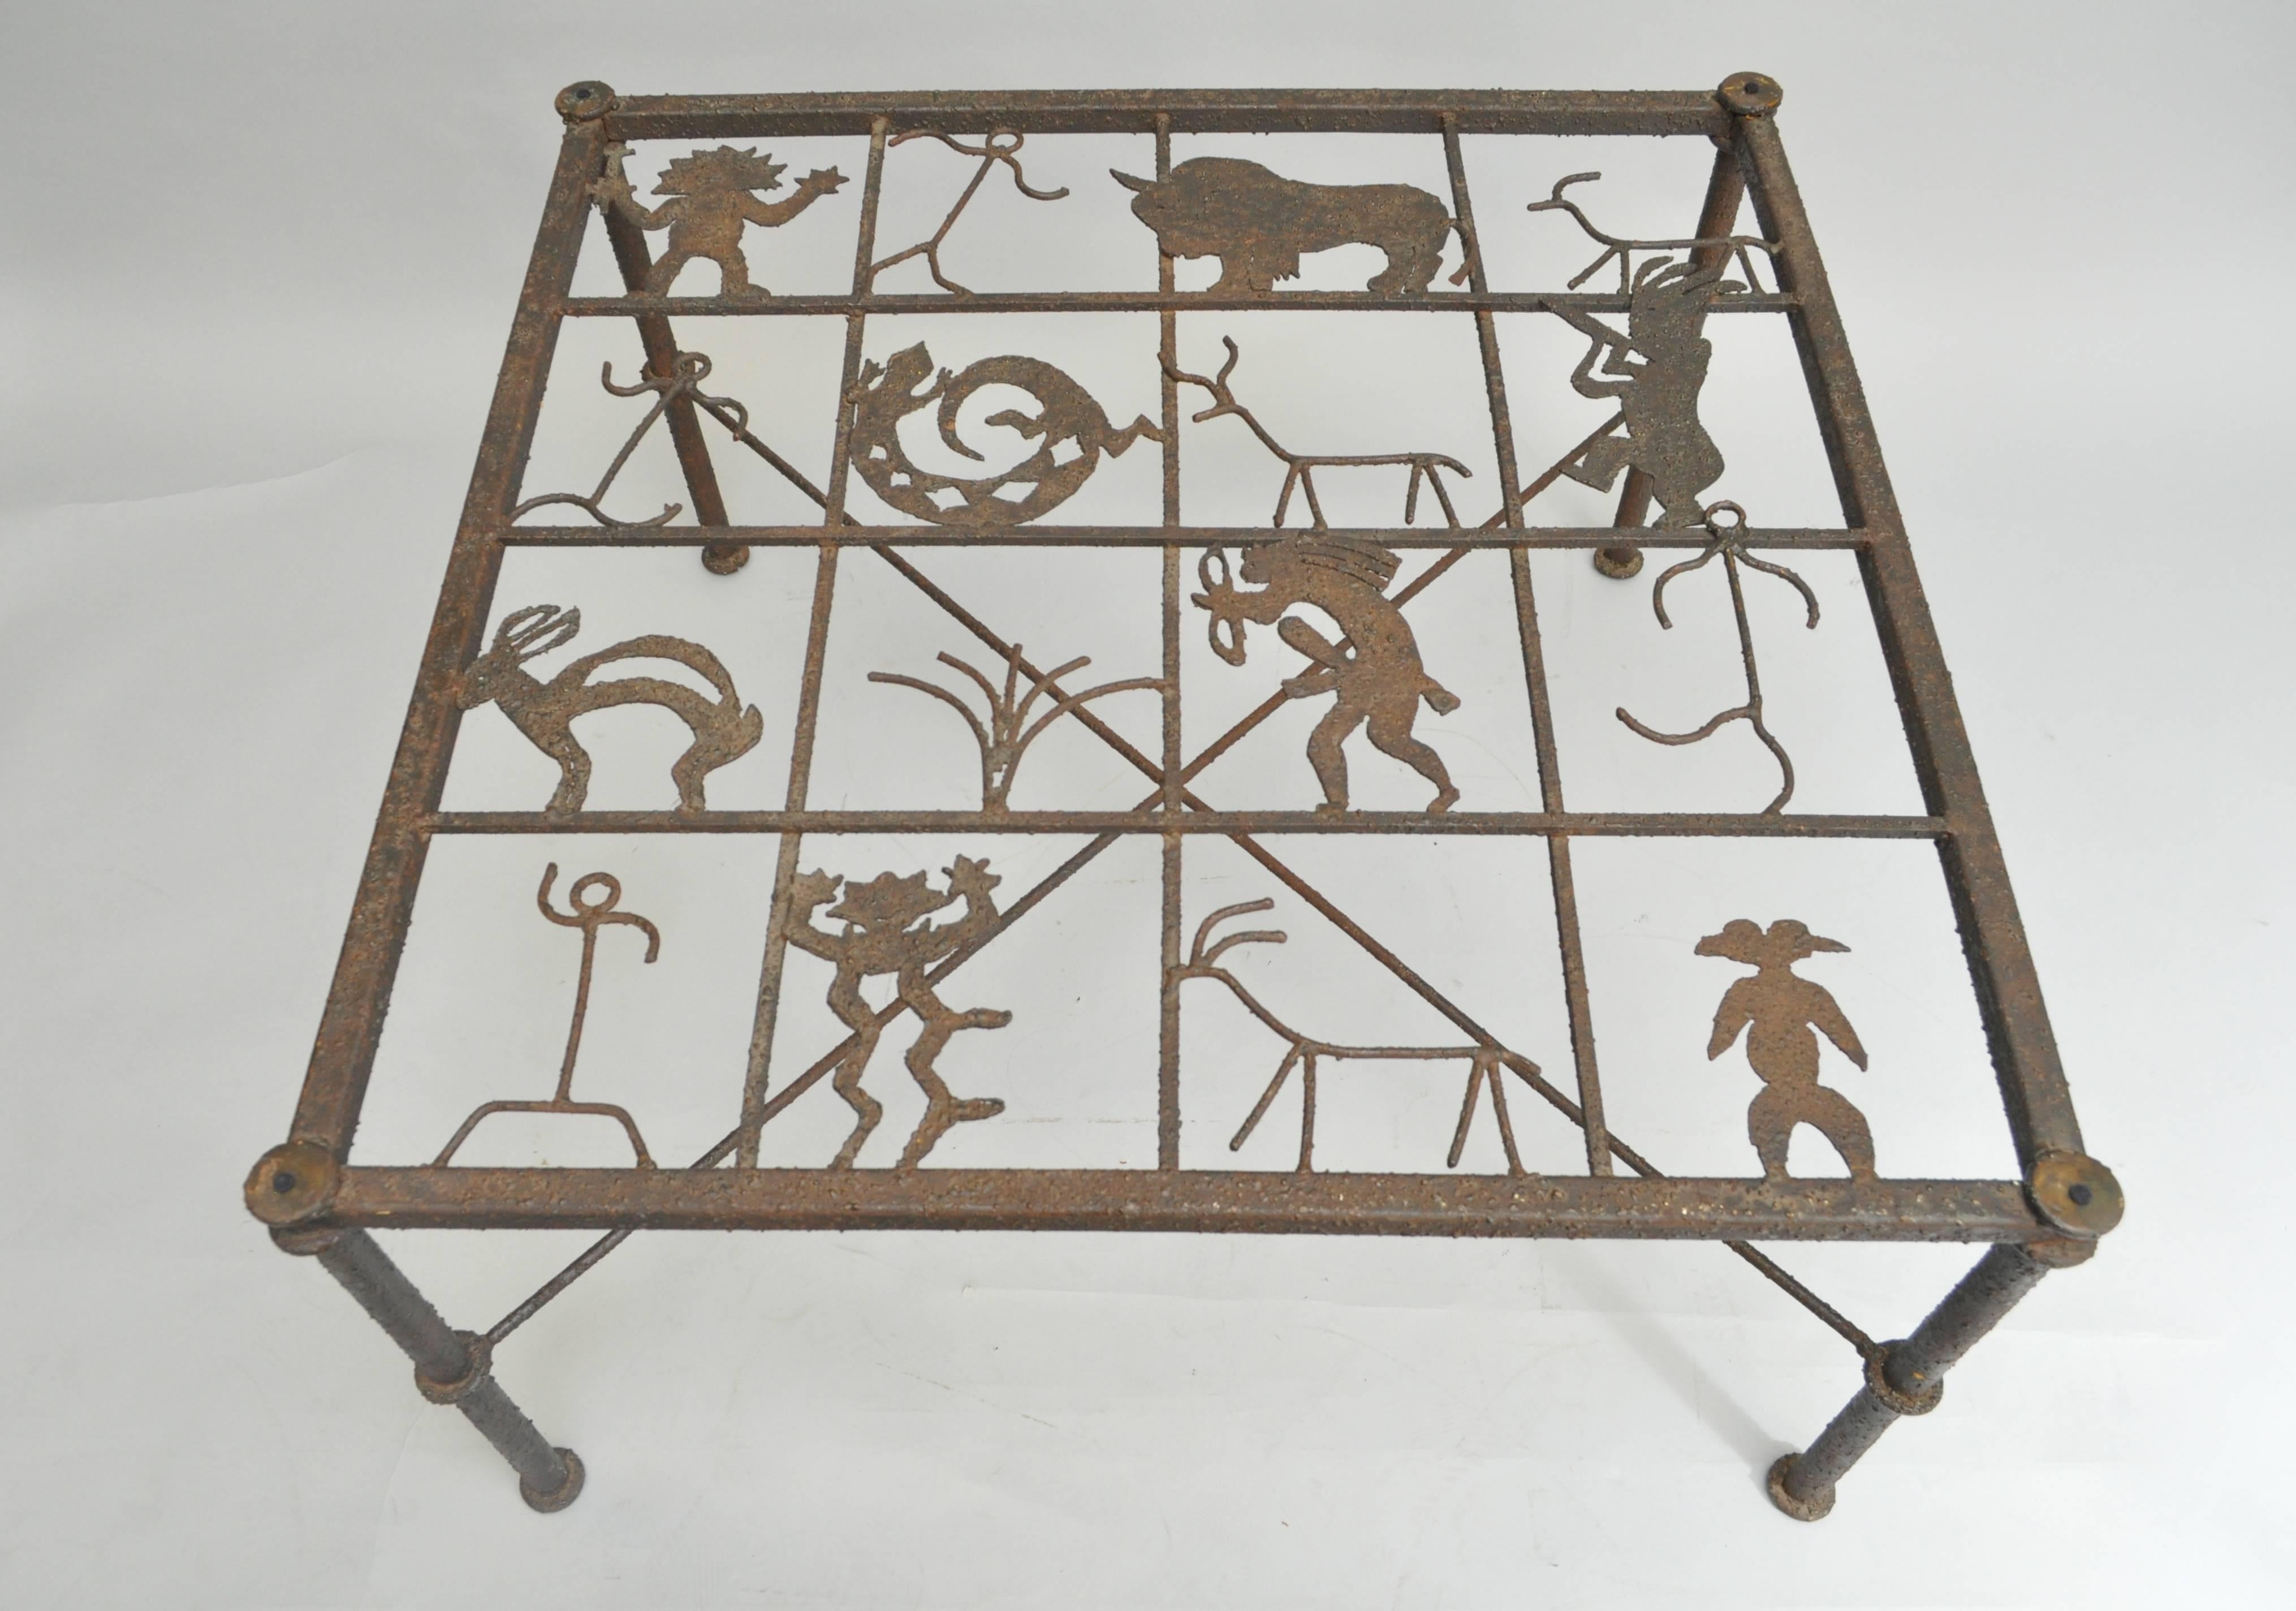 Very unique Brutalist style metal and glass square Brutalist coffee table with Welded Native American Style handmade Glyph Figures. Item features a patinated rustic metal frame with X-form stretcher base and 16 figures on the top which is covered by